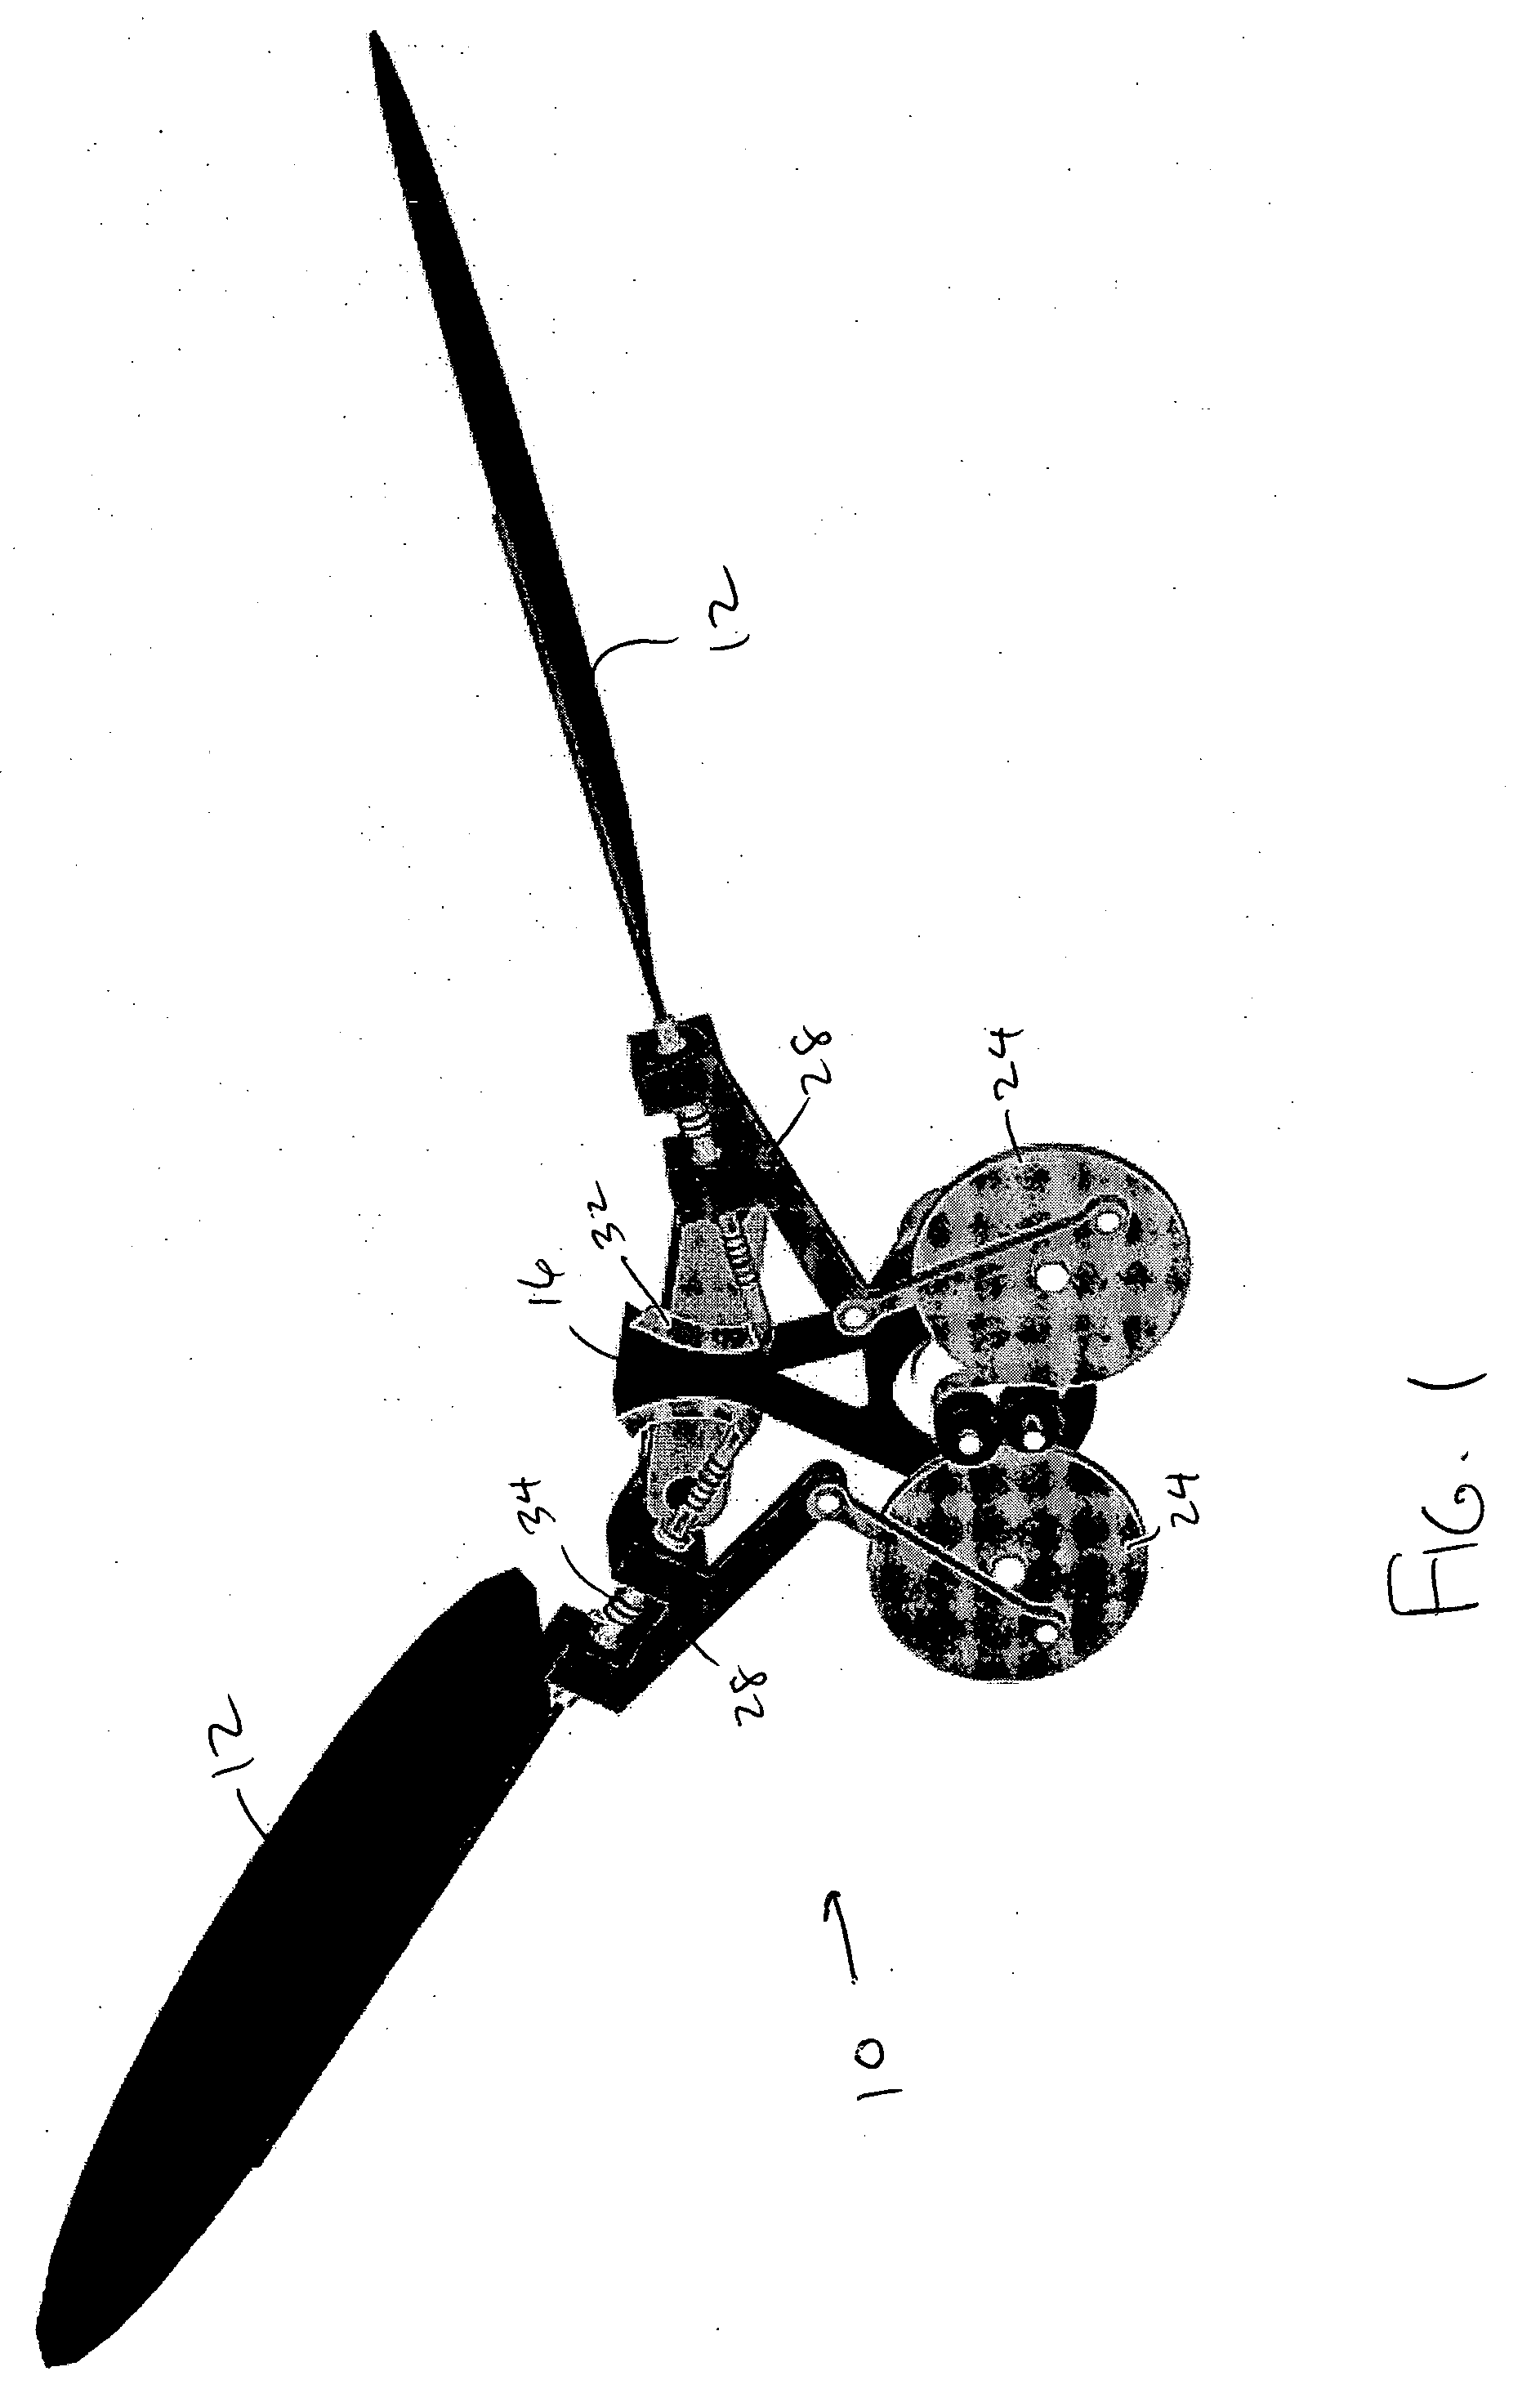 Mechanism for biaxial rotation of a wing and vehicle containing such mechanism